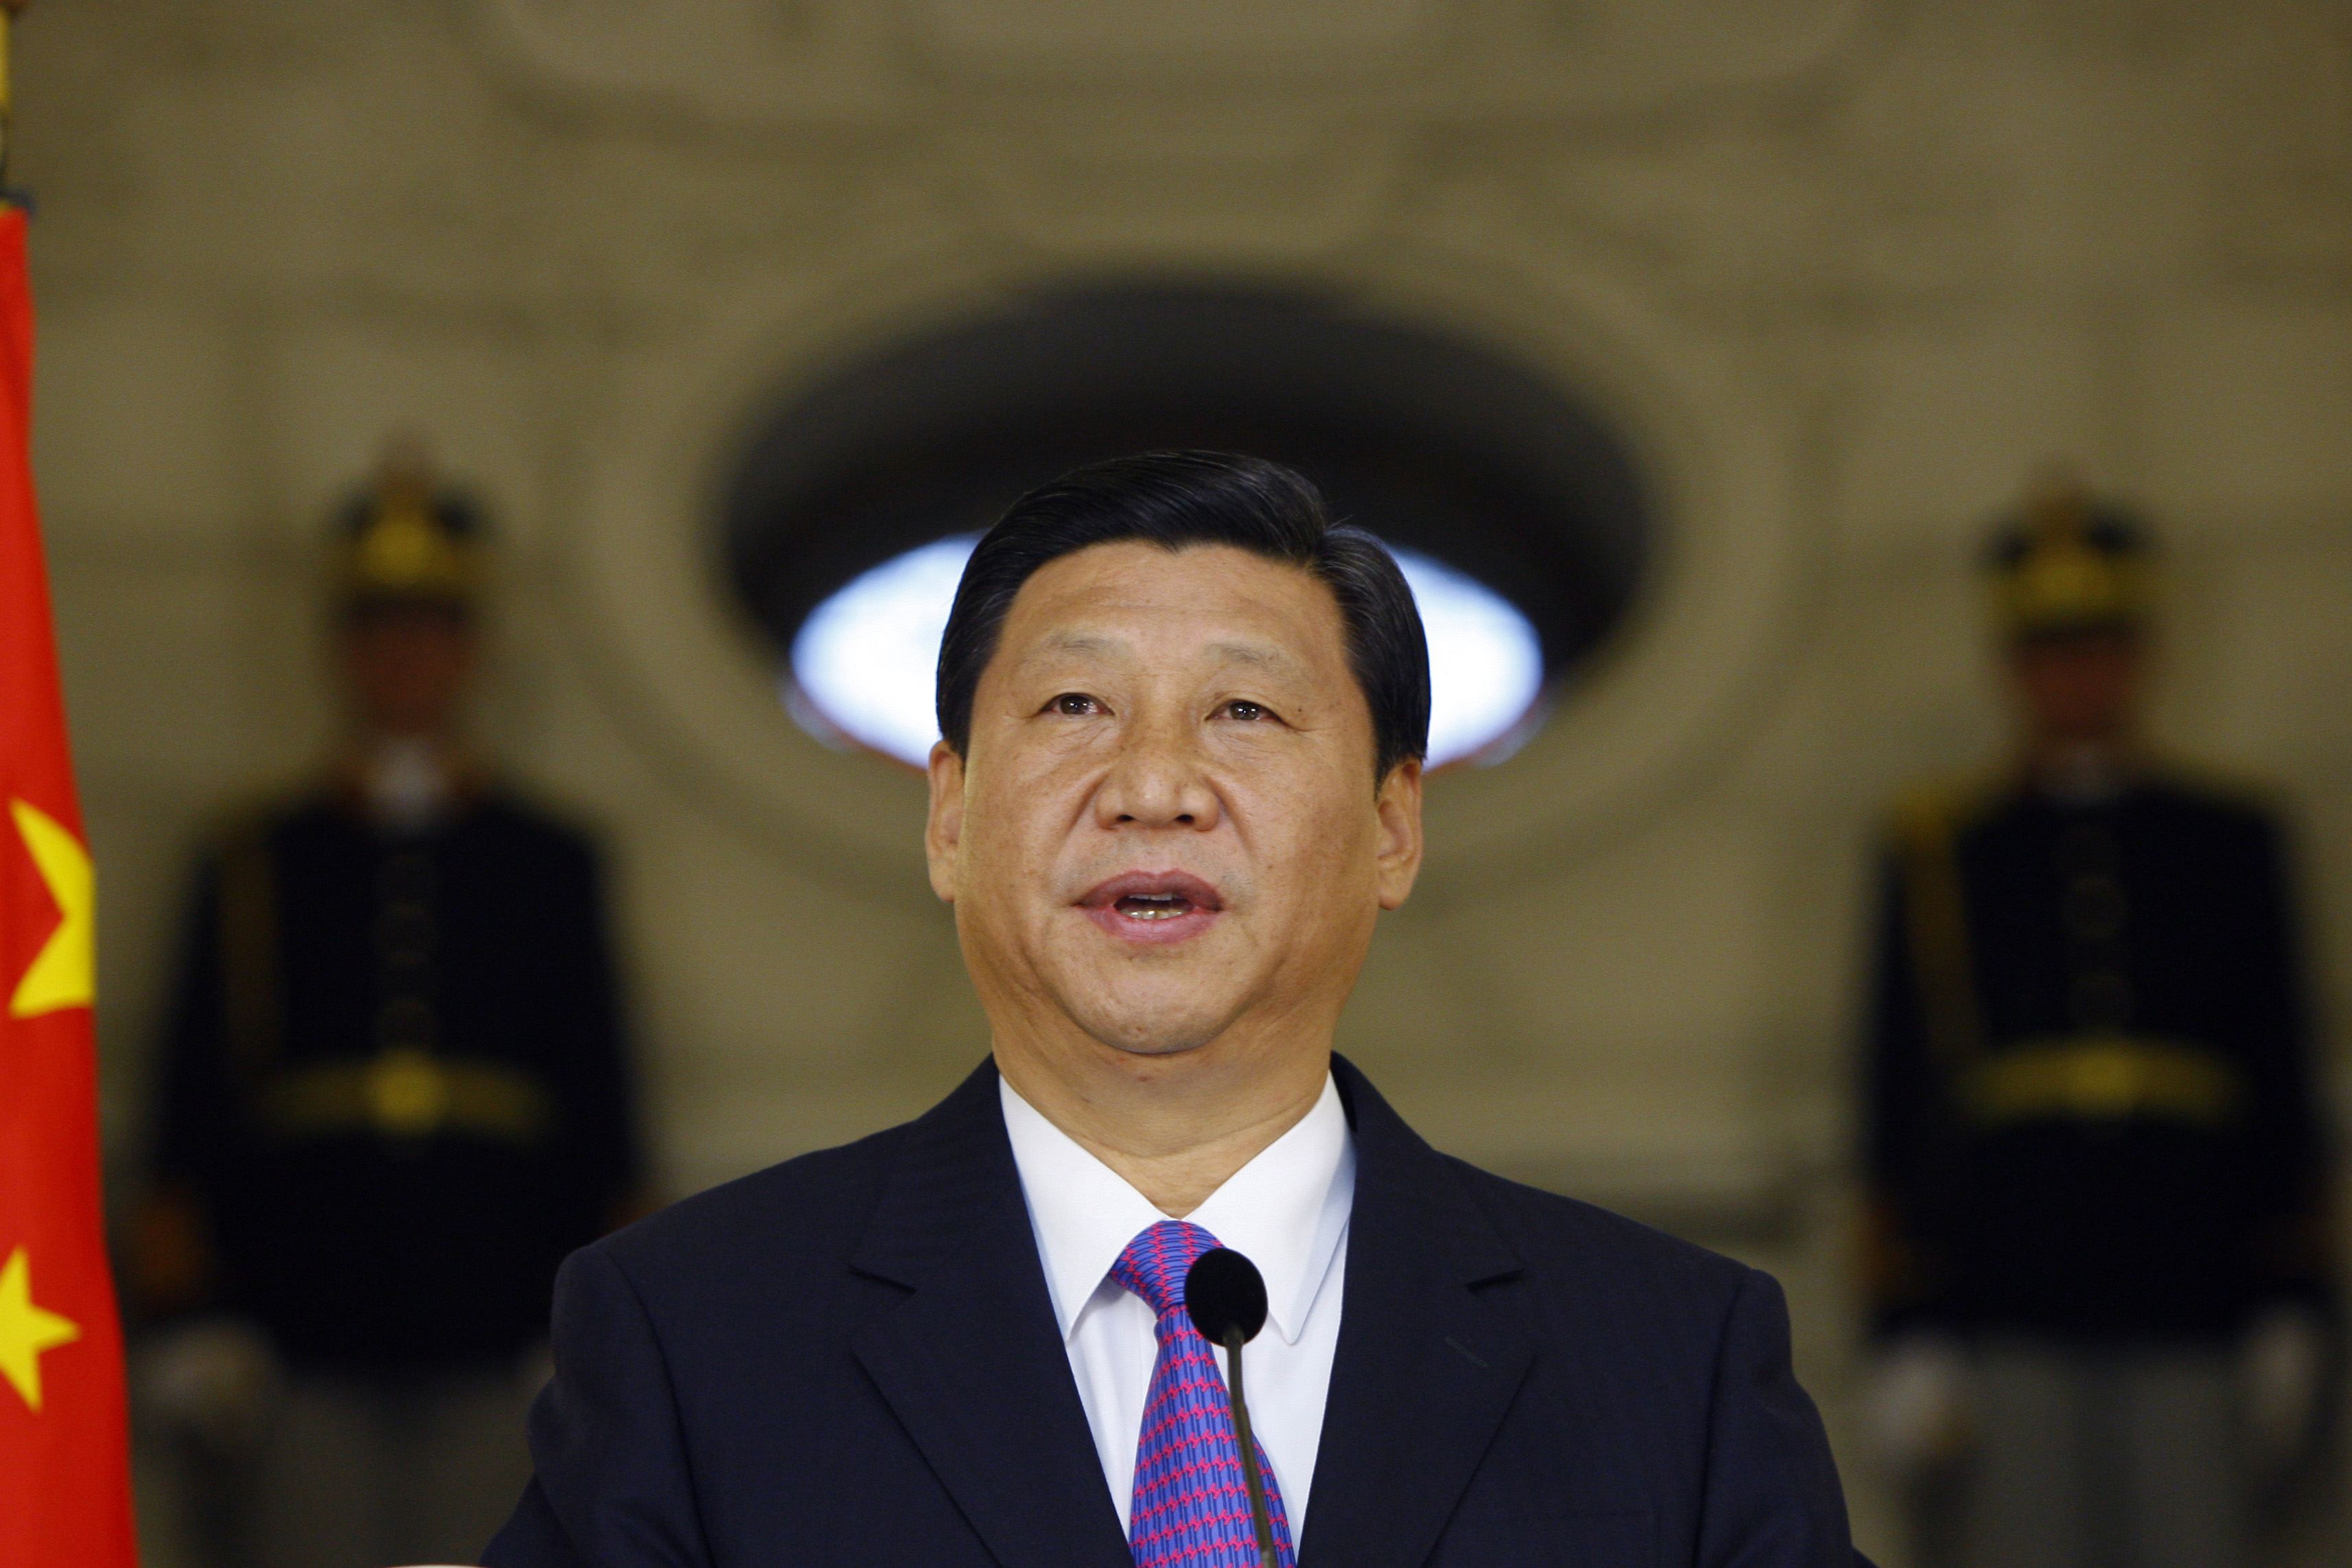 The general buzz seems to be that President Xi Jinping has clean hands, and thus  the standing to lead the anti-graft campaign. Photo: Reuters